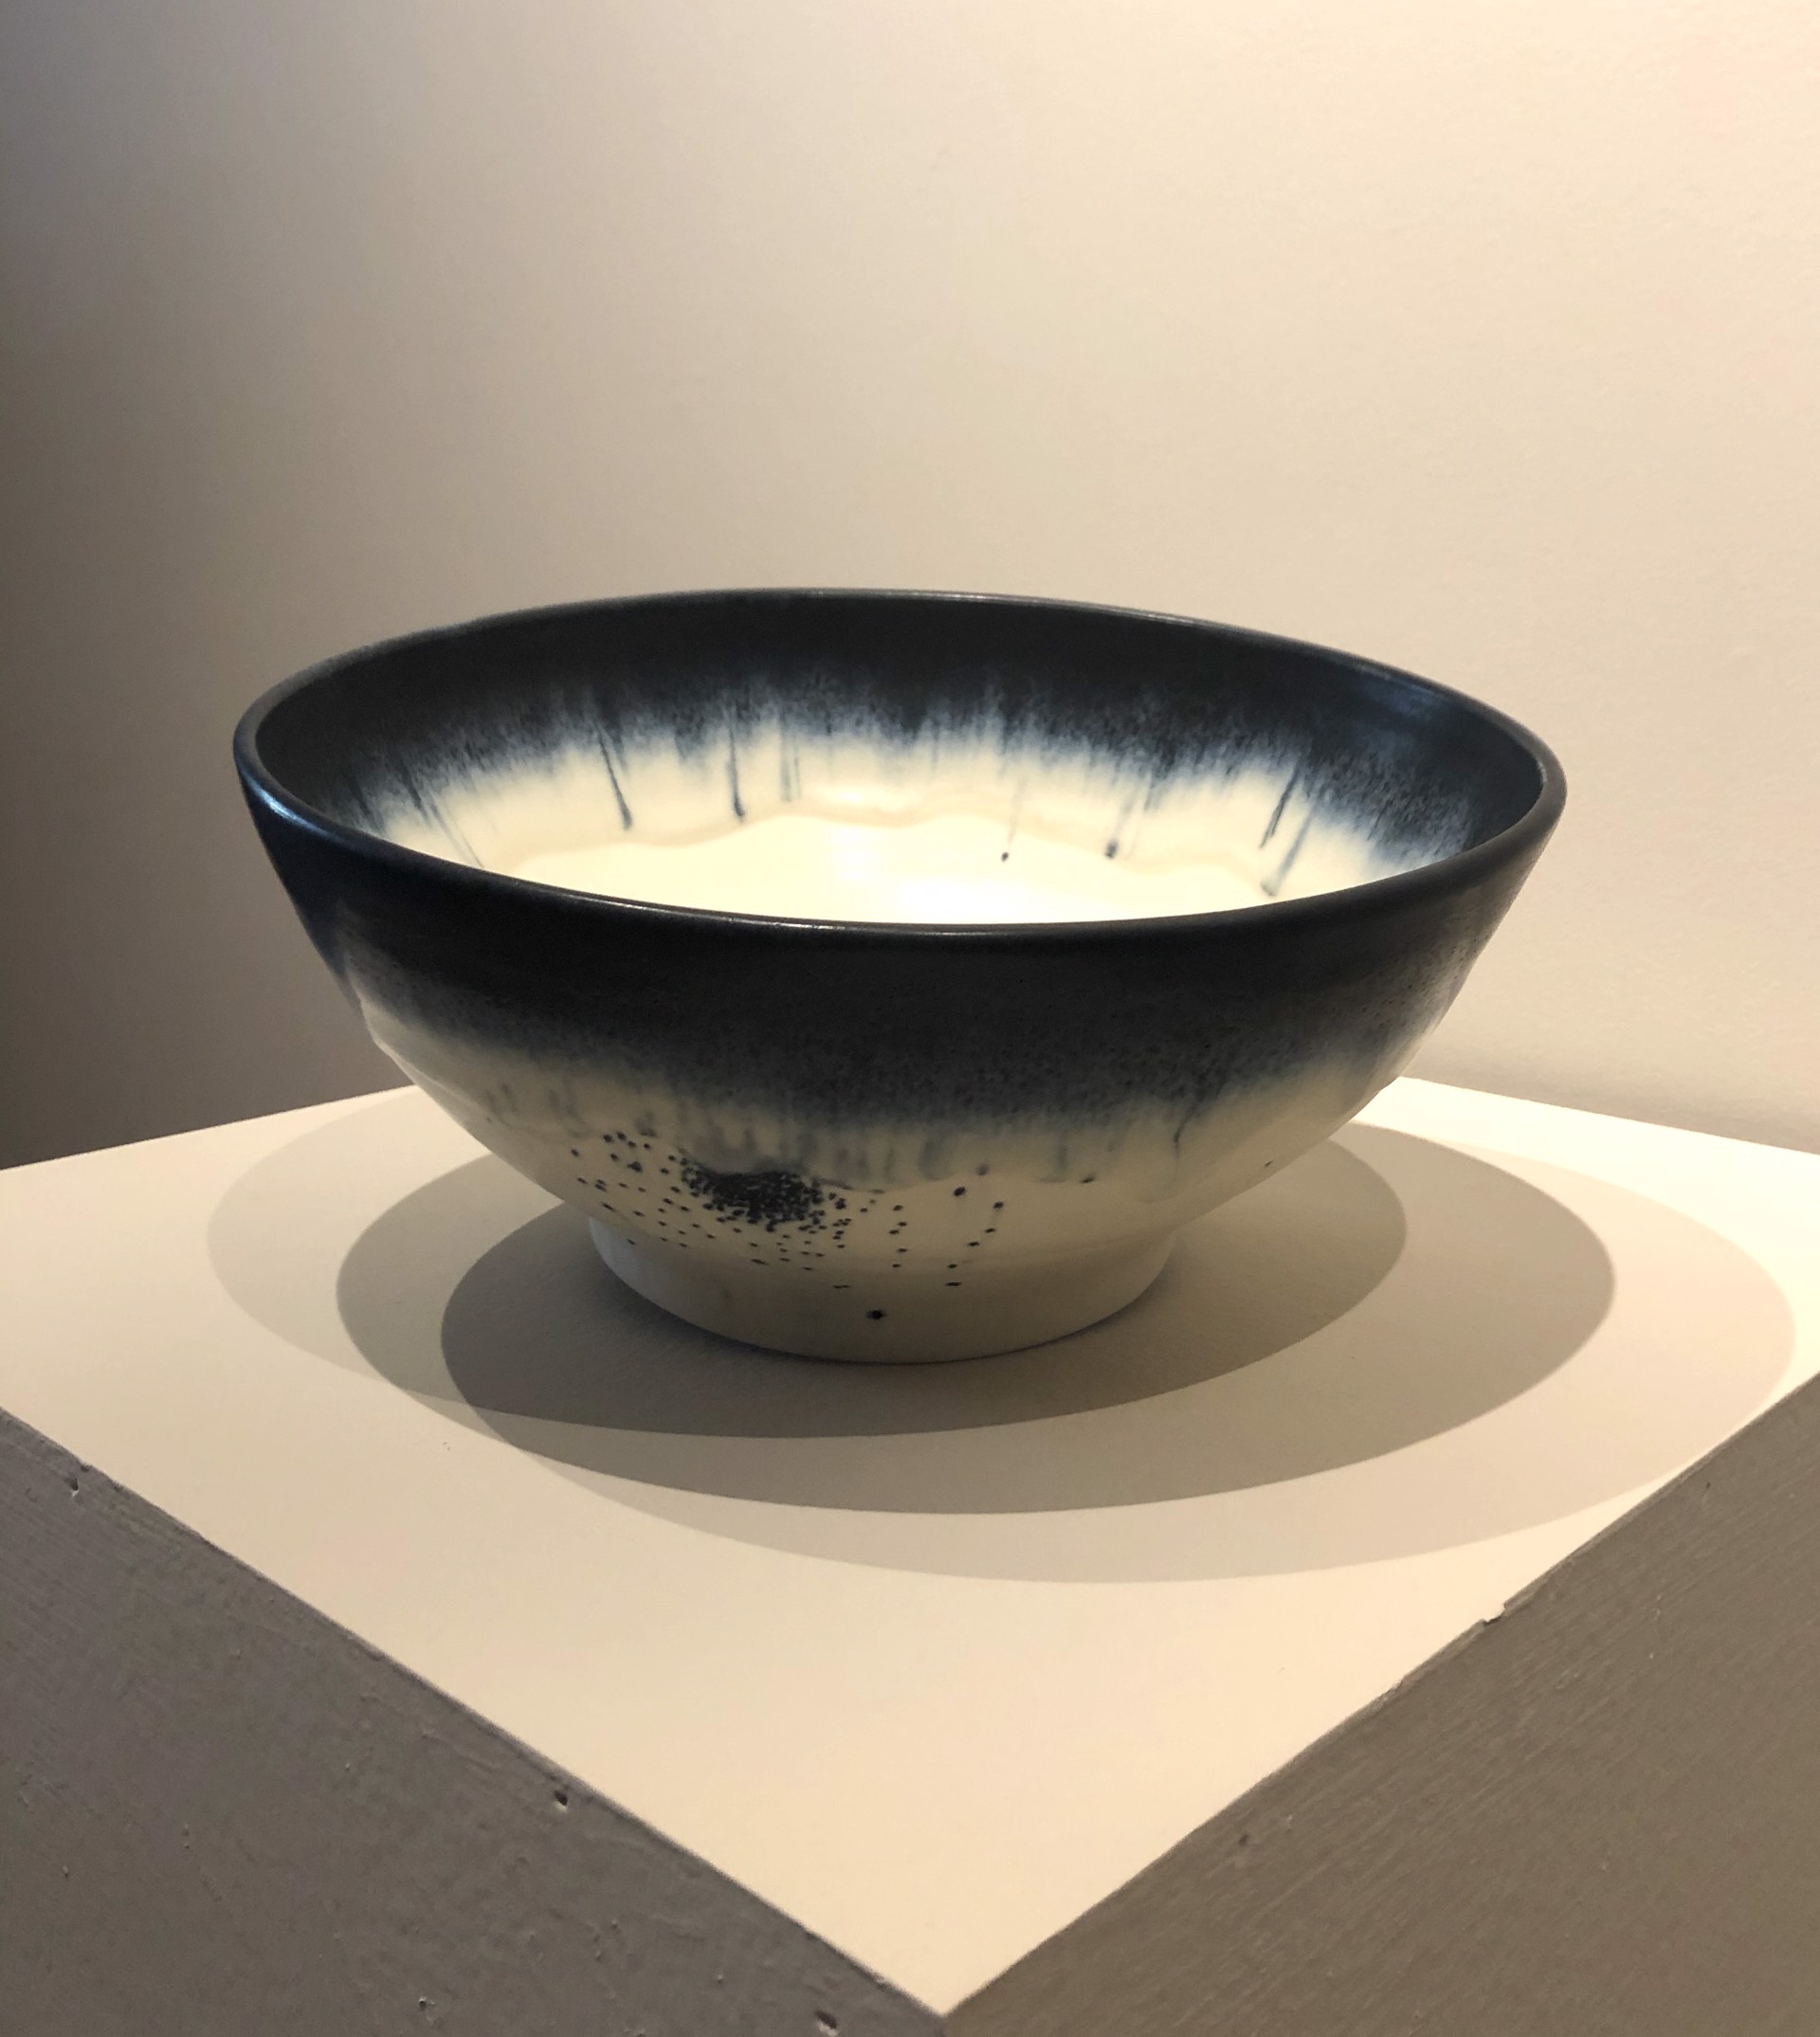 Halo + Marks: Large Serving Bowl by Désirée Petty